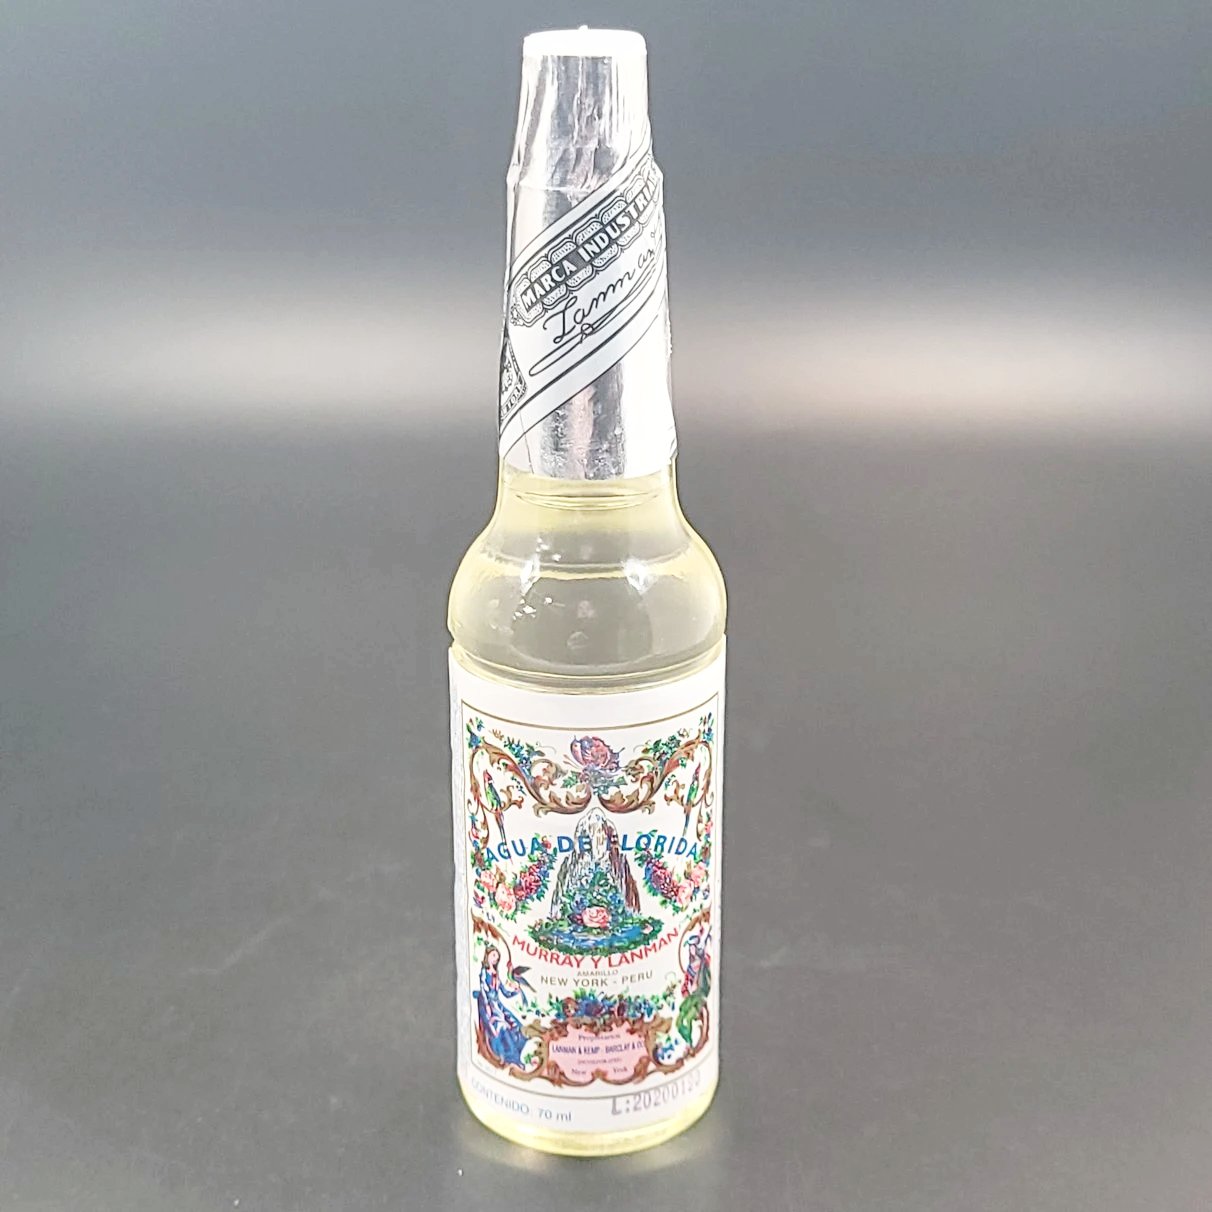 Florida Water from Peru 75ml Pocket Sample Size Spiritual Cologne - Elevated Metaphysical